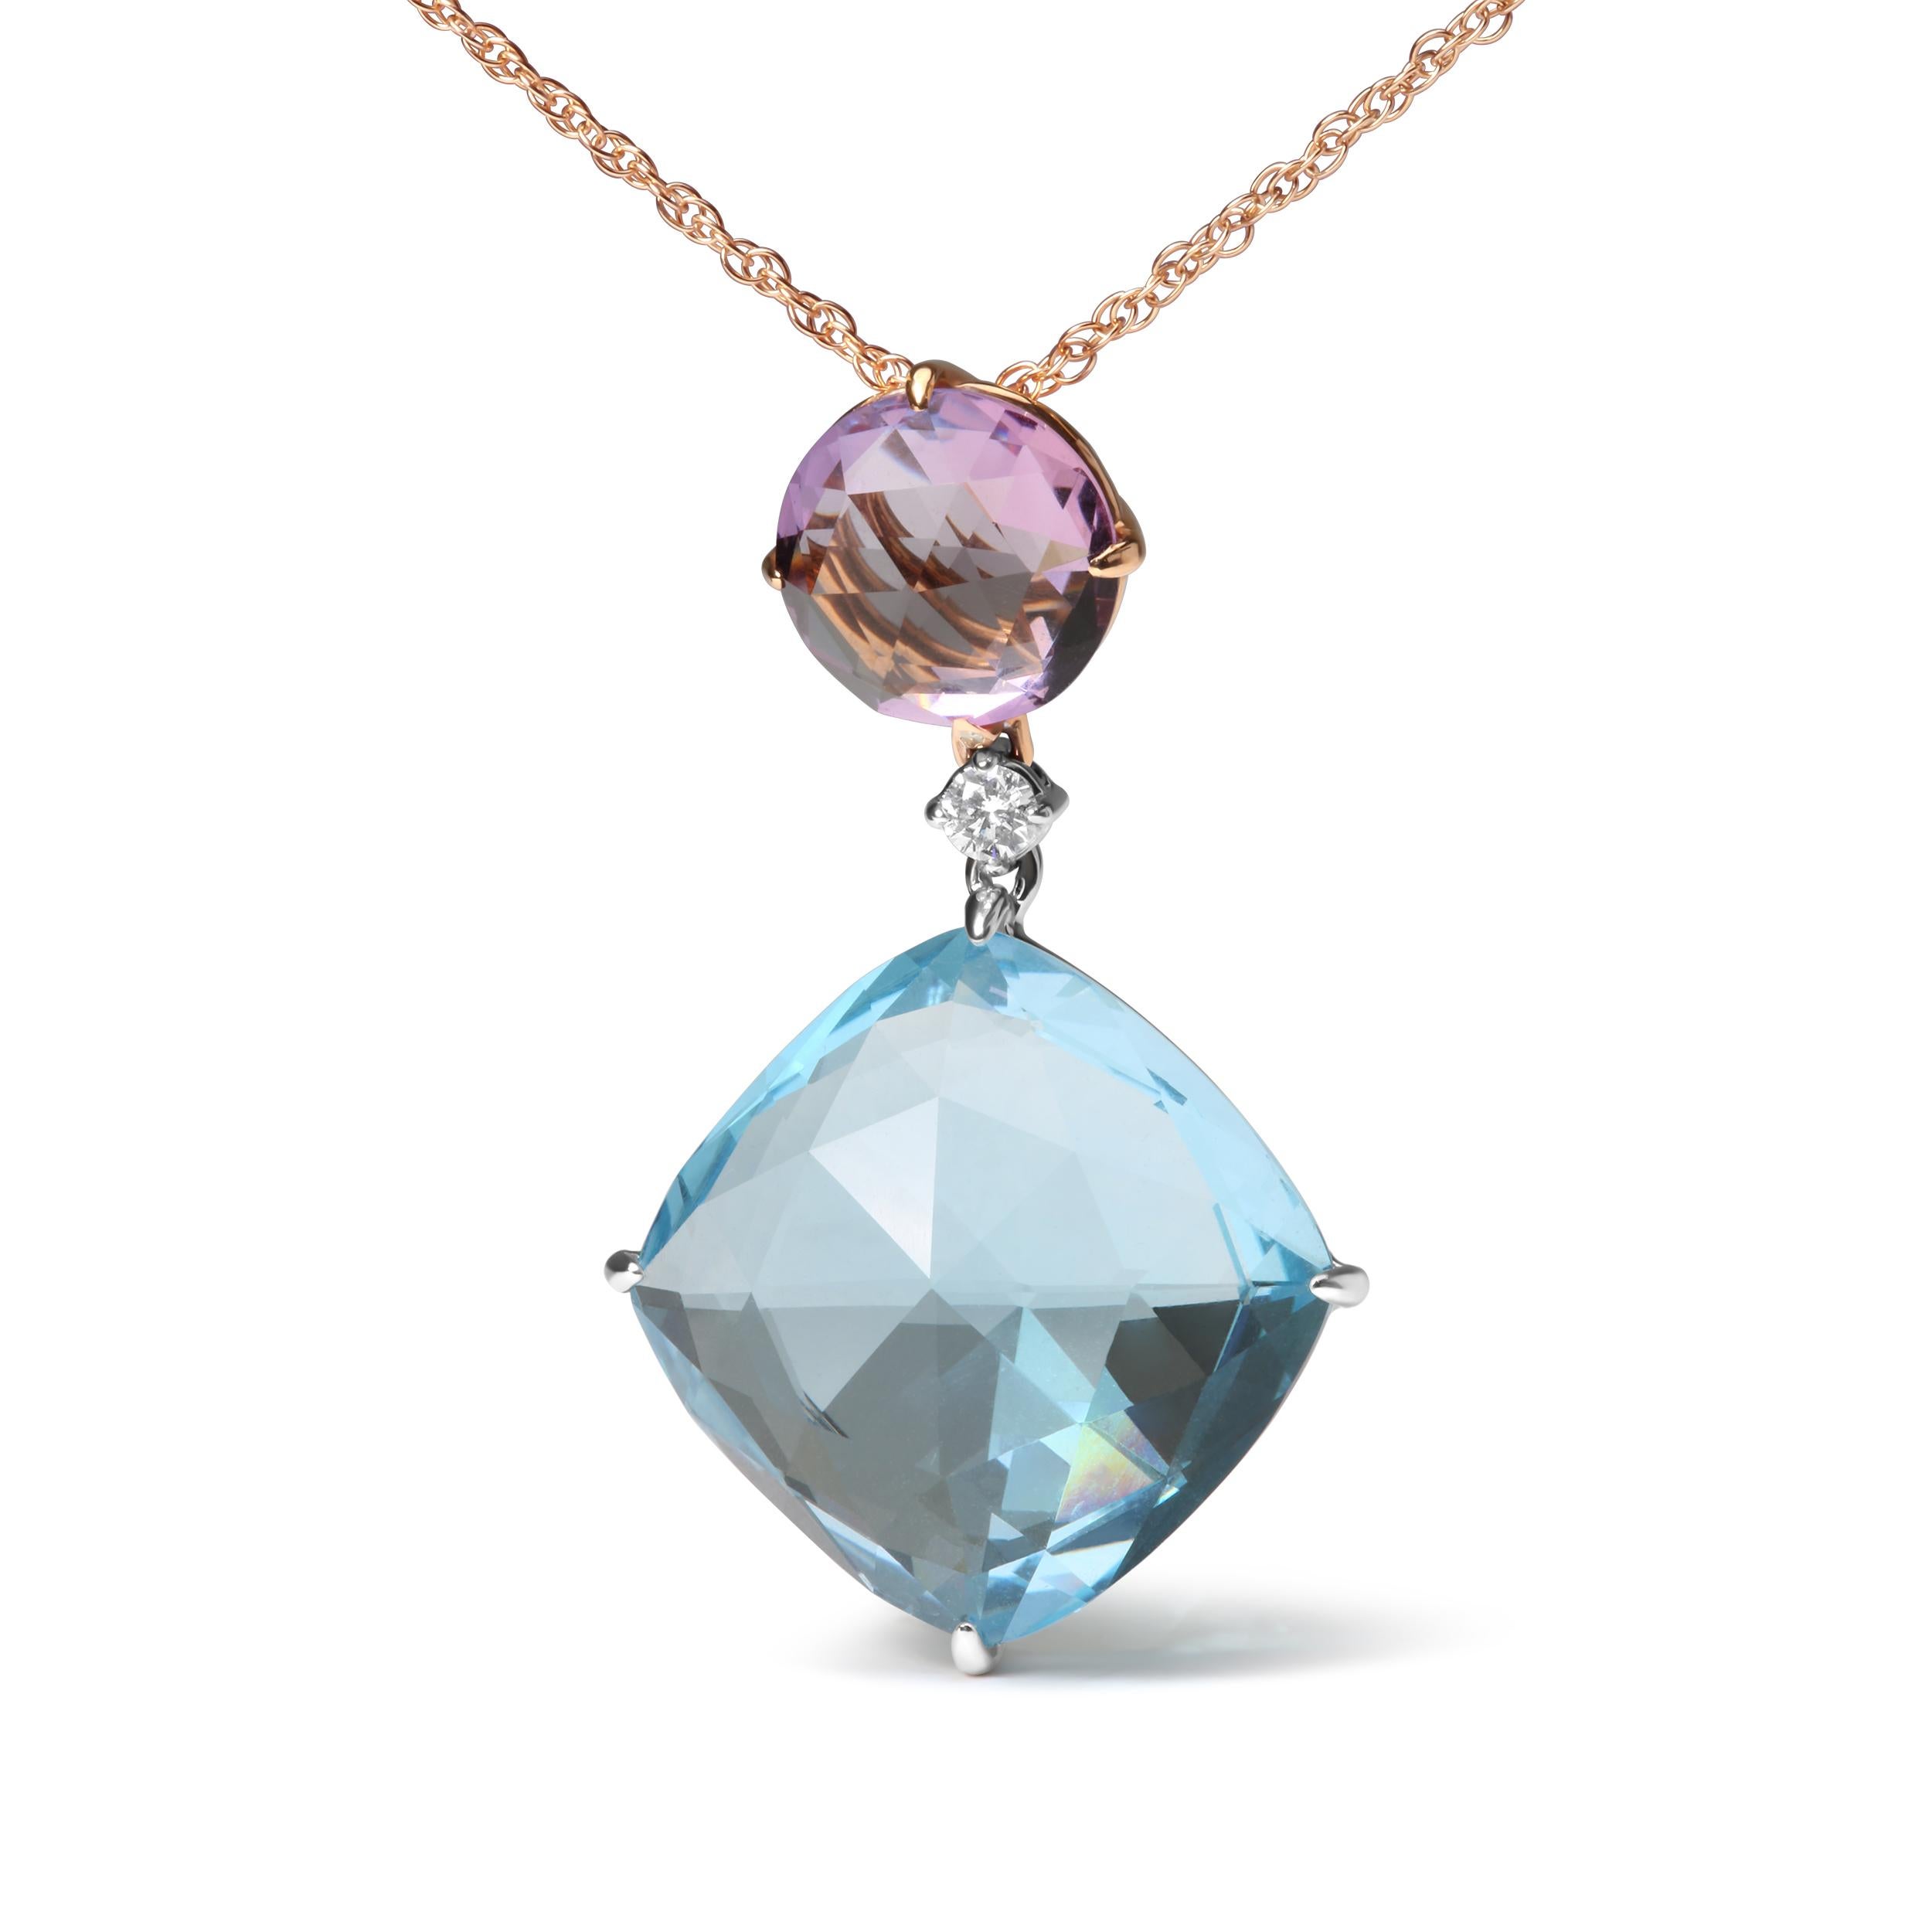 Every woman deserves jewelry that sparkles like this stunning 18k white and rose gold pendant necklace. The elegant 10x10mm round Rose De France pink amethyst that tops this pendant is worthy of a standing ovation, showcased in a 4-prong setting.